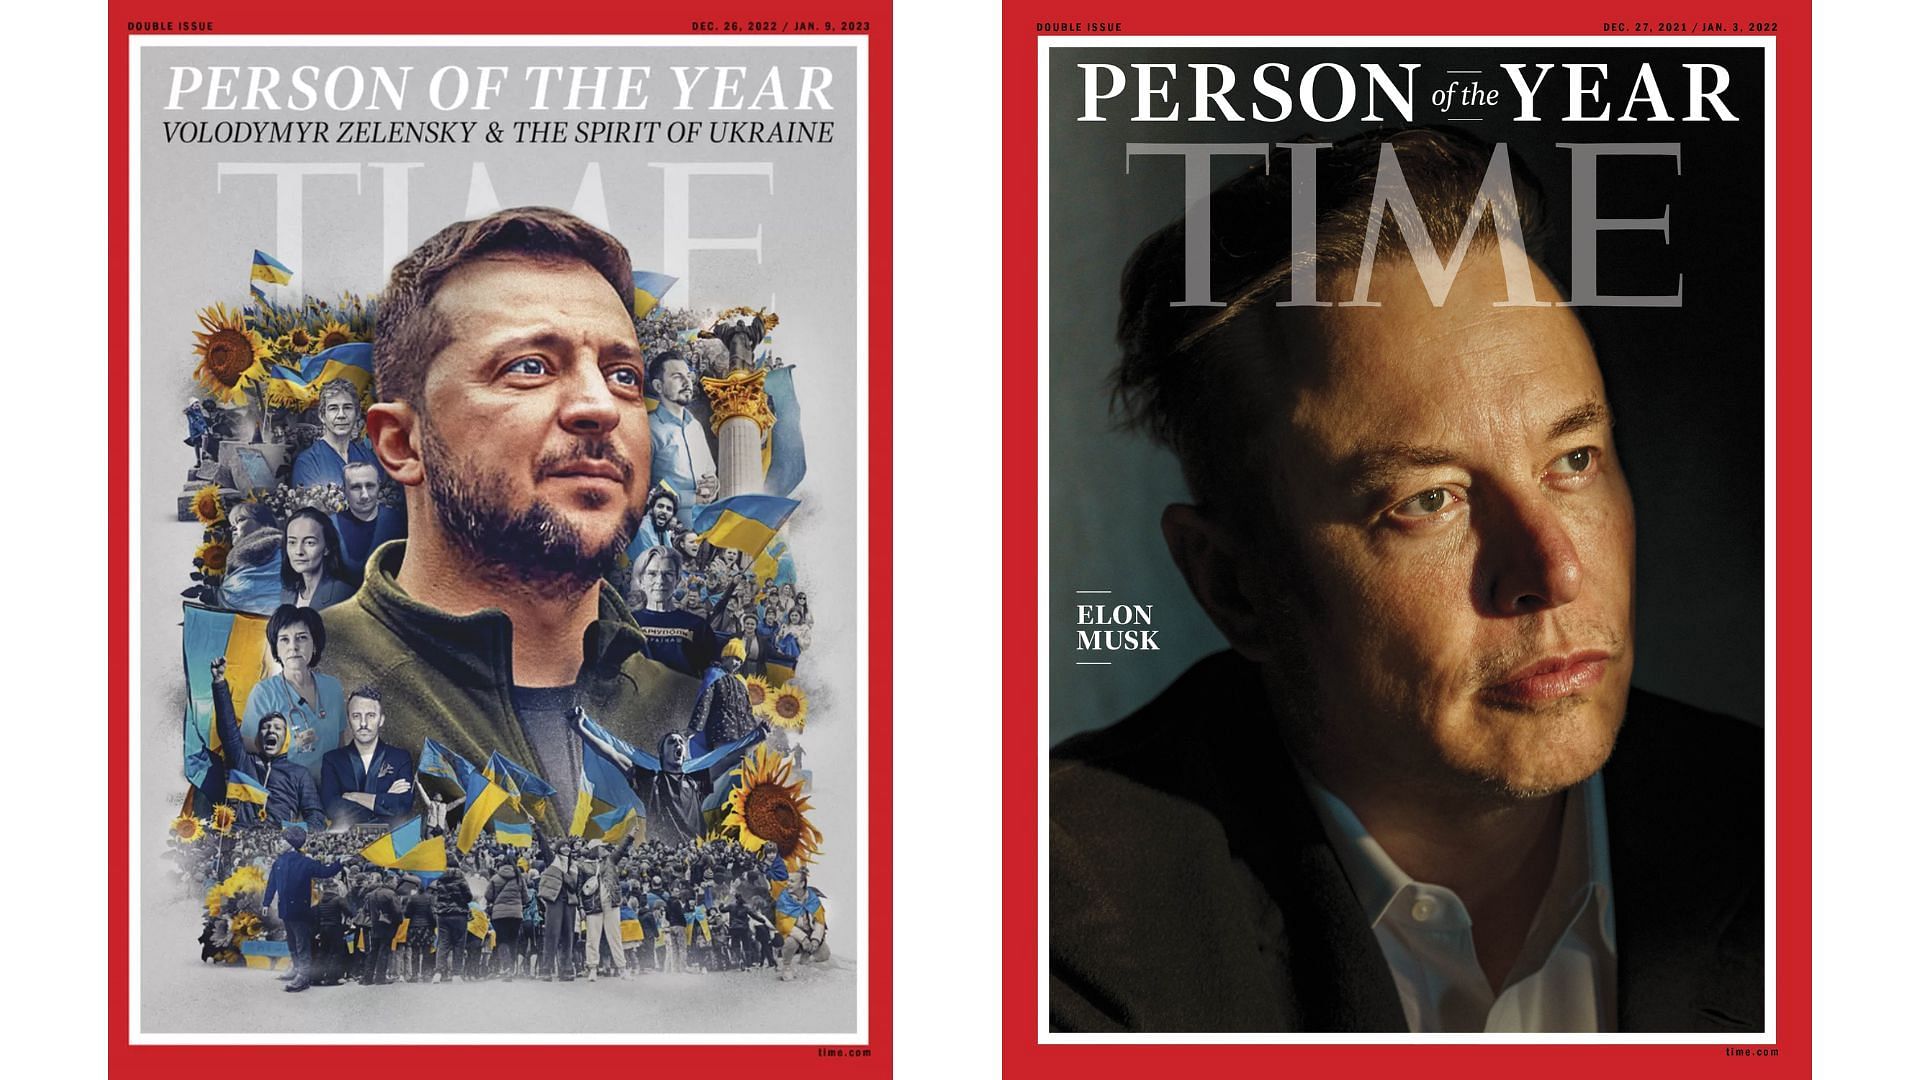 Volodymyr Zelensky (L) and Elon Musk (R) on the cover (Image via Twitter/@time)